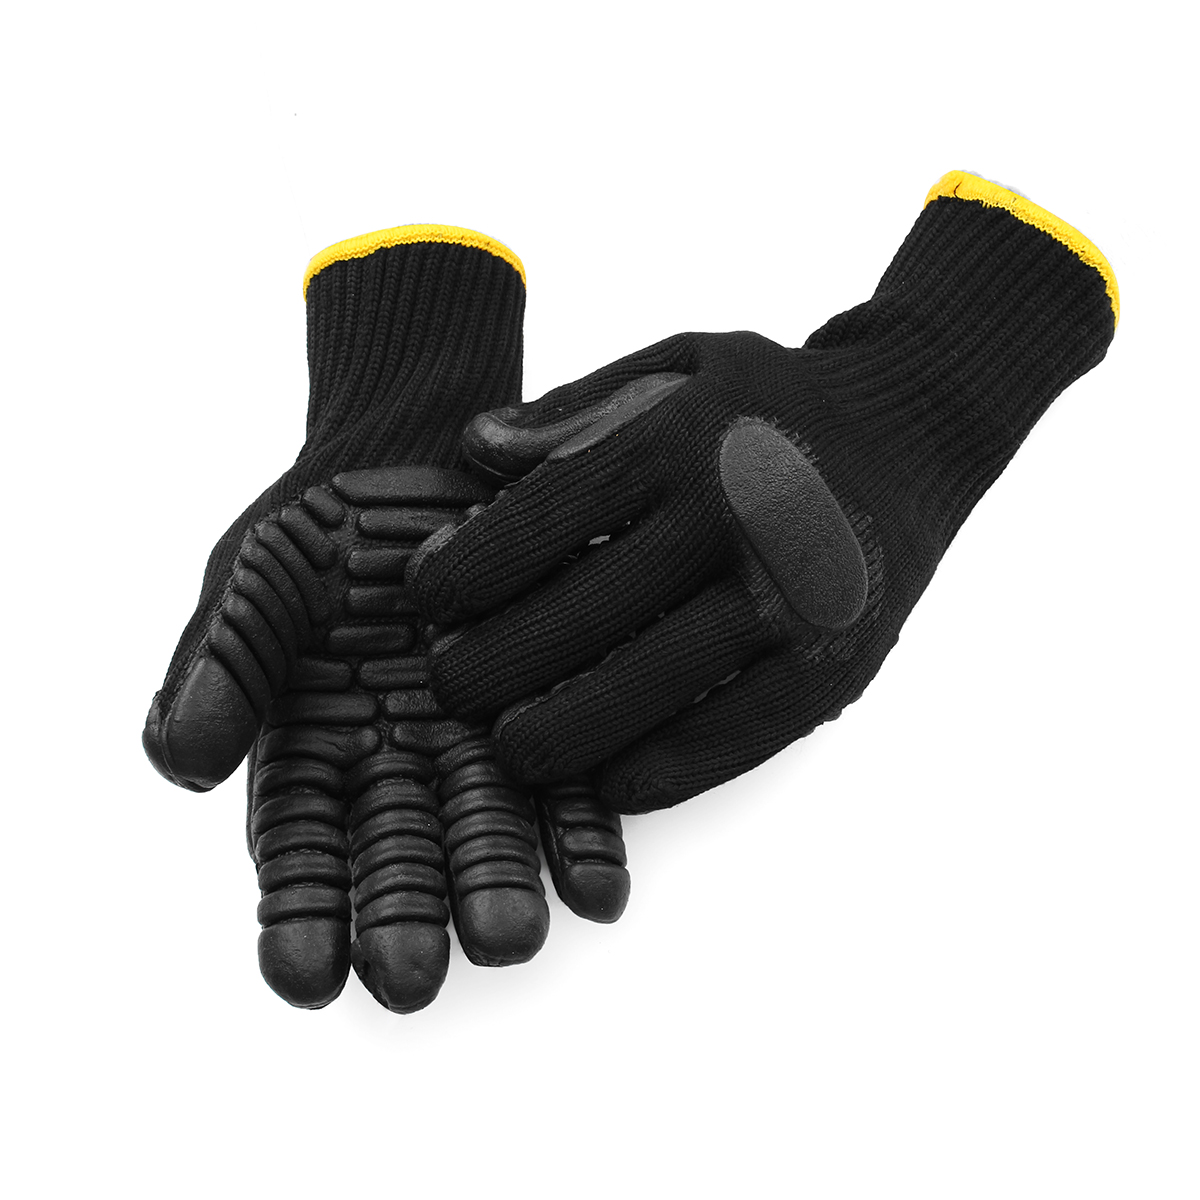 Rubber-Touch-Screen-Gloves-Anti-slip-Shockproof-Worker-Safe-Gloves-Thickened-Mining-Drill-Work-Tacti-1231695-5